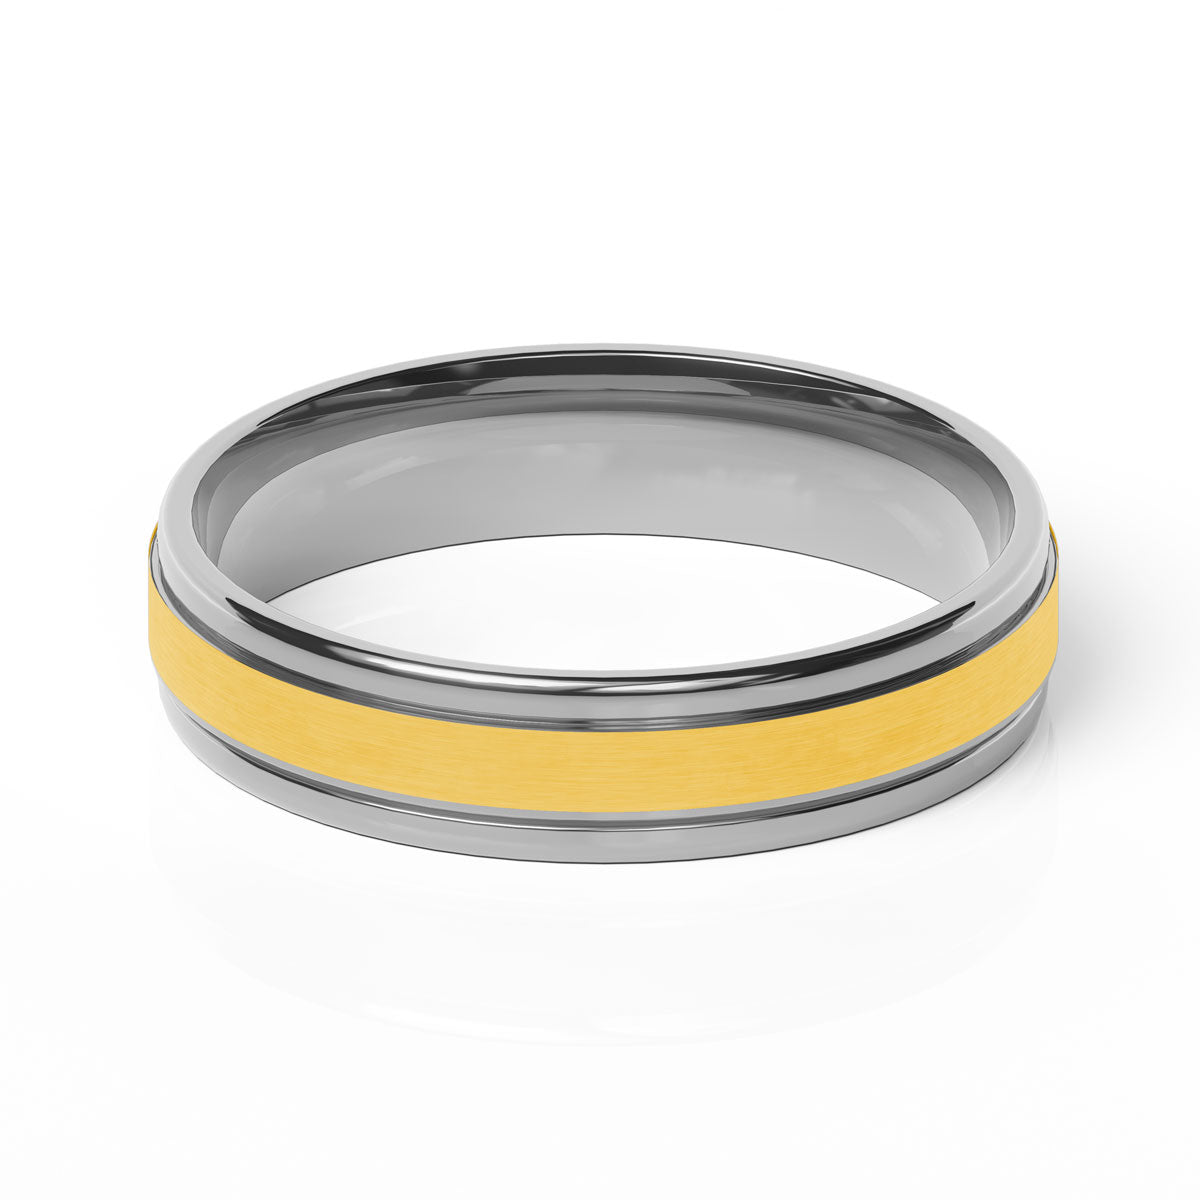 Comfort Fit 5MM Carved Wedding Band with Satin Inlay